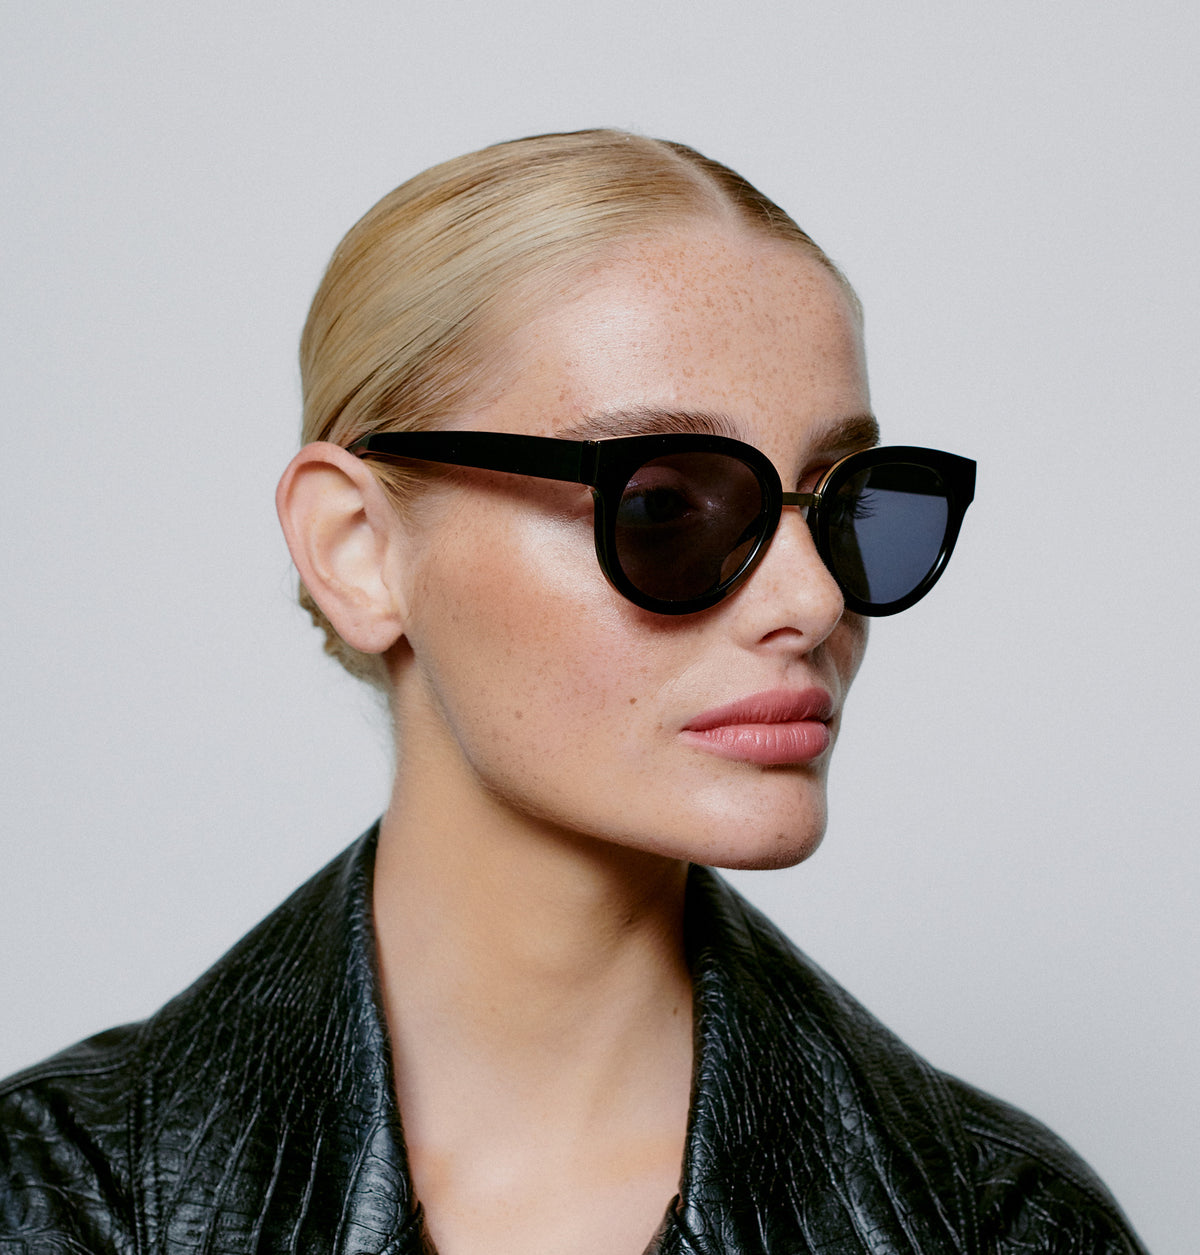 discover-A.KJAERBEDE-sunglasses-at-kings-road-fashions